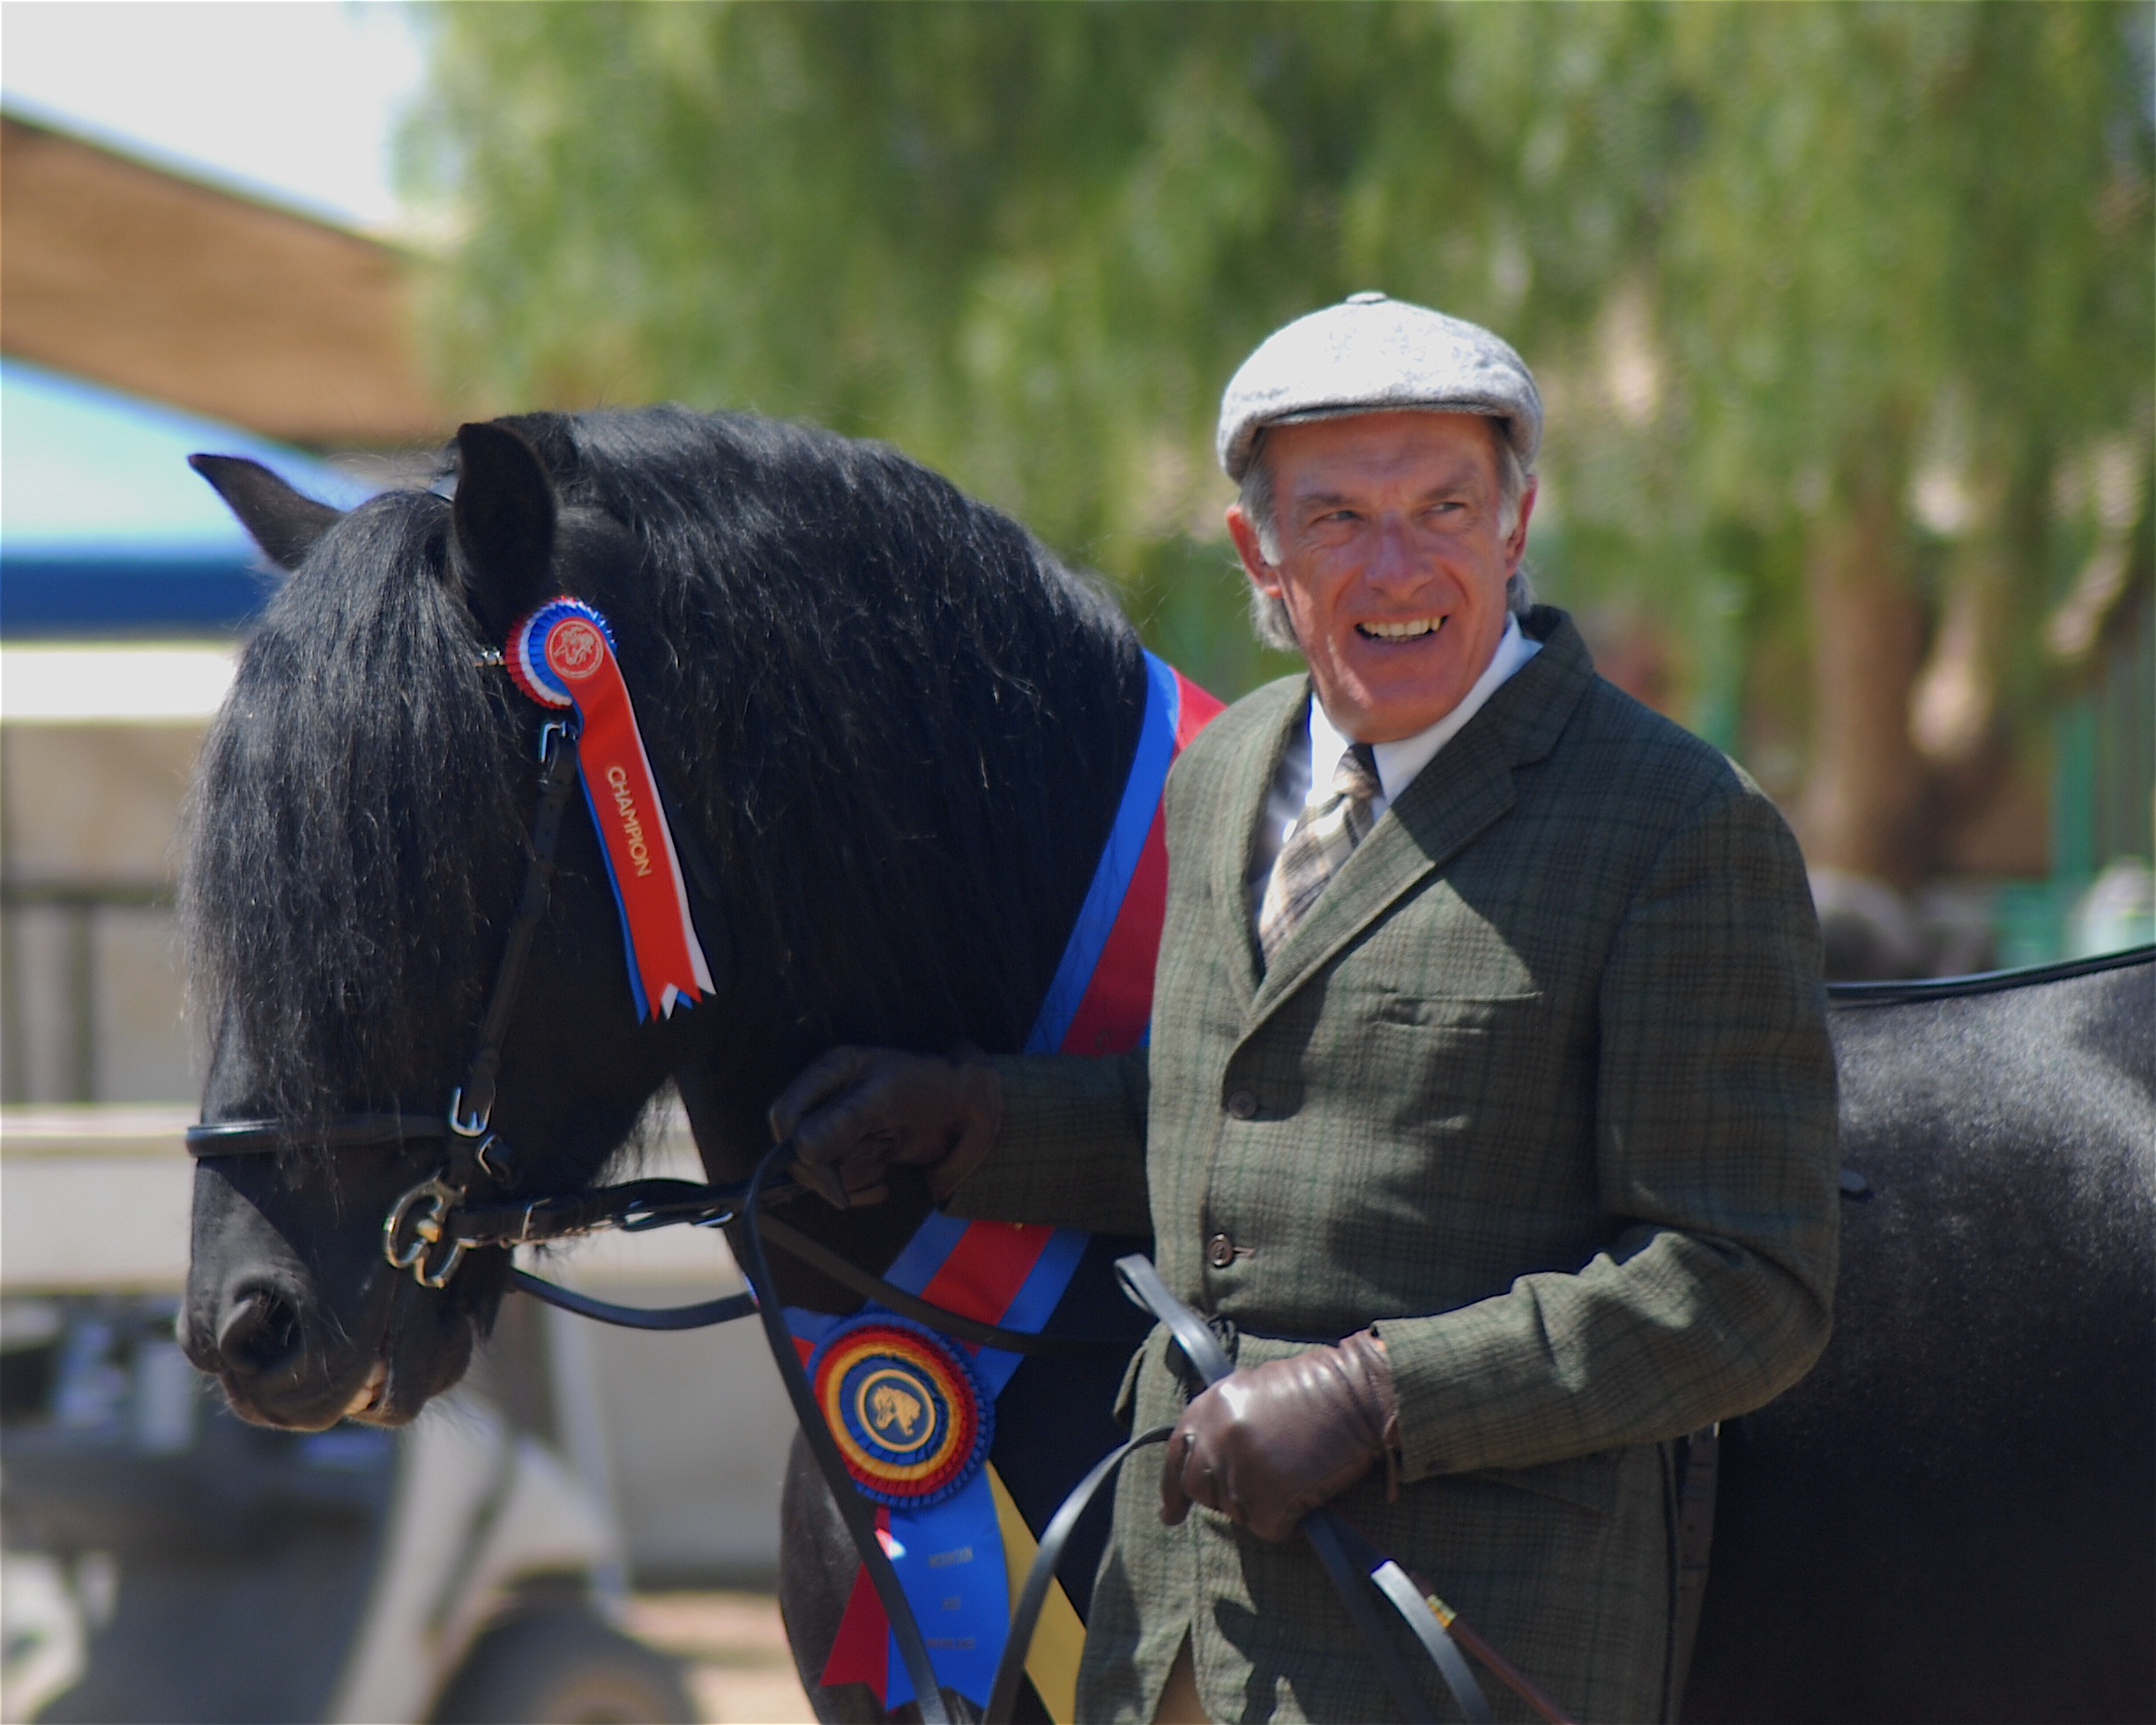 Roger Cleverly shows Colliery Alick at the 2007 West Coast Connemara Show, where he earns Champion M&M Pony and Reserve Best in Show